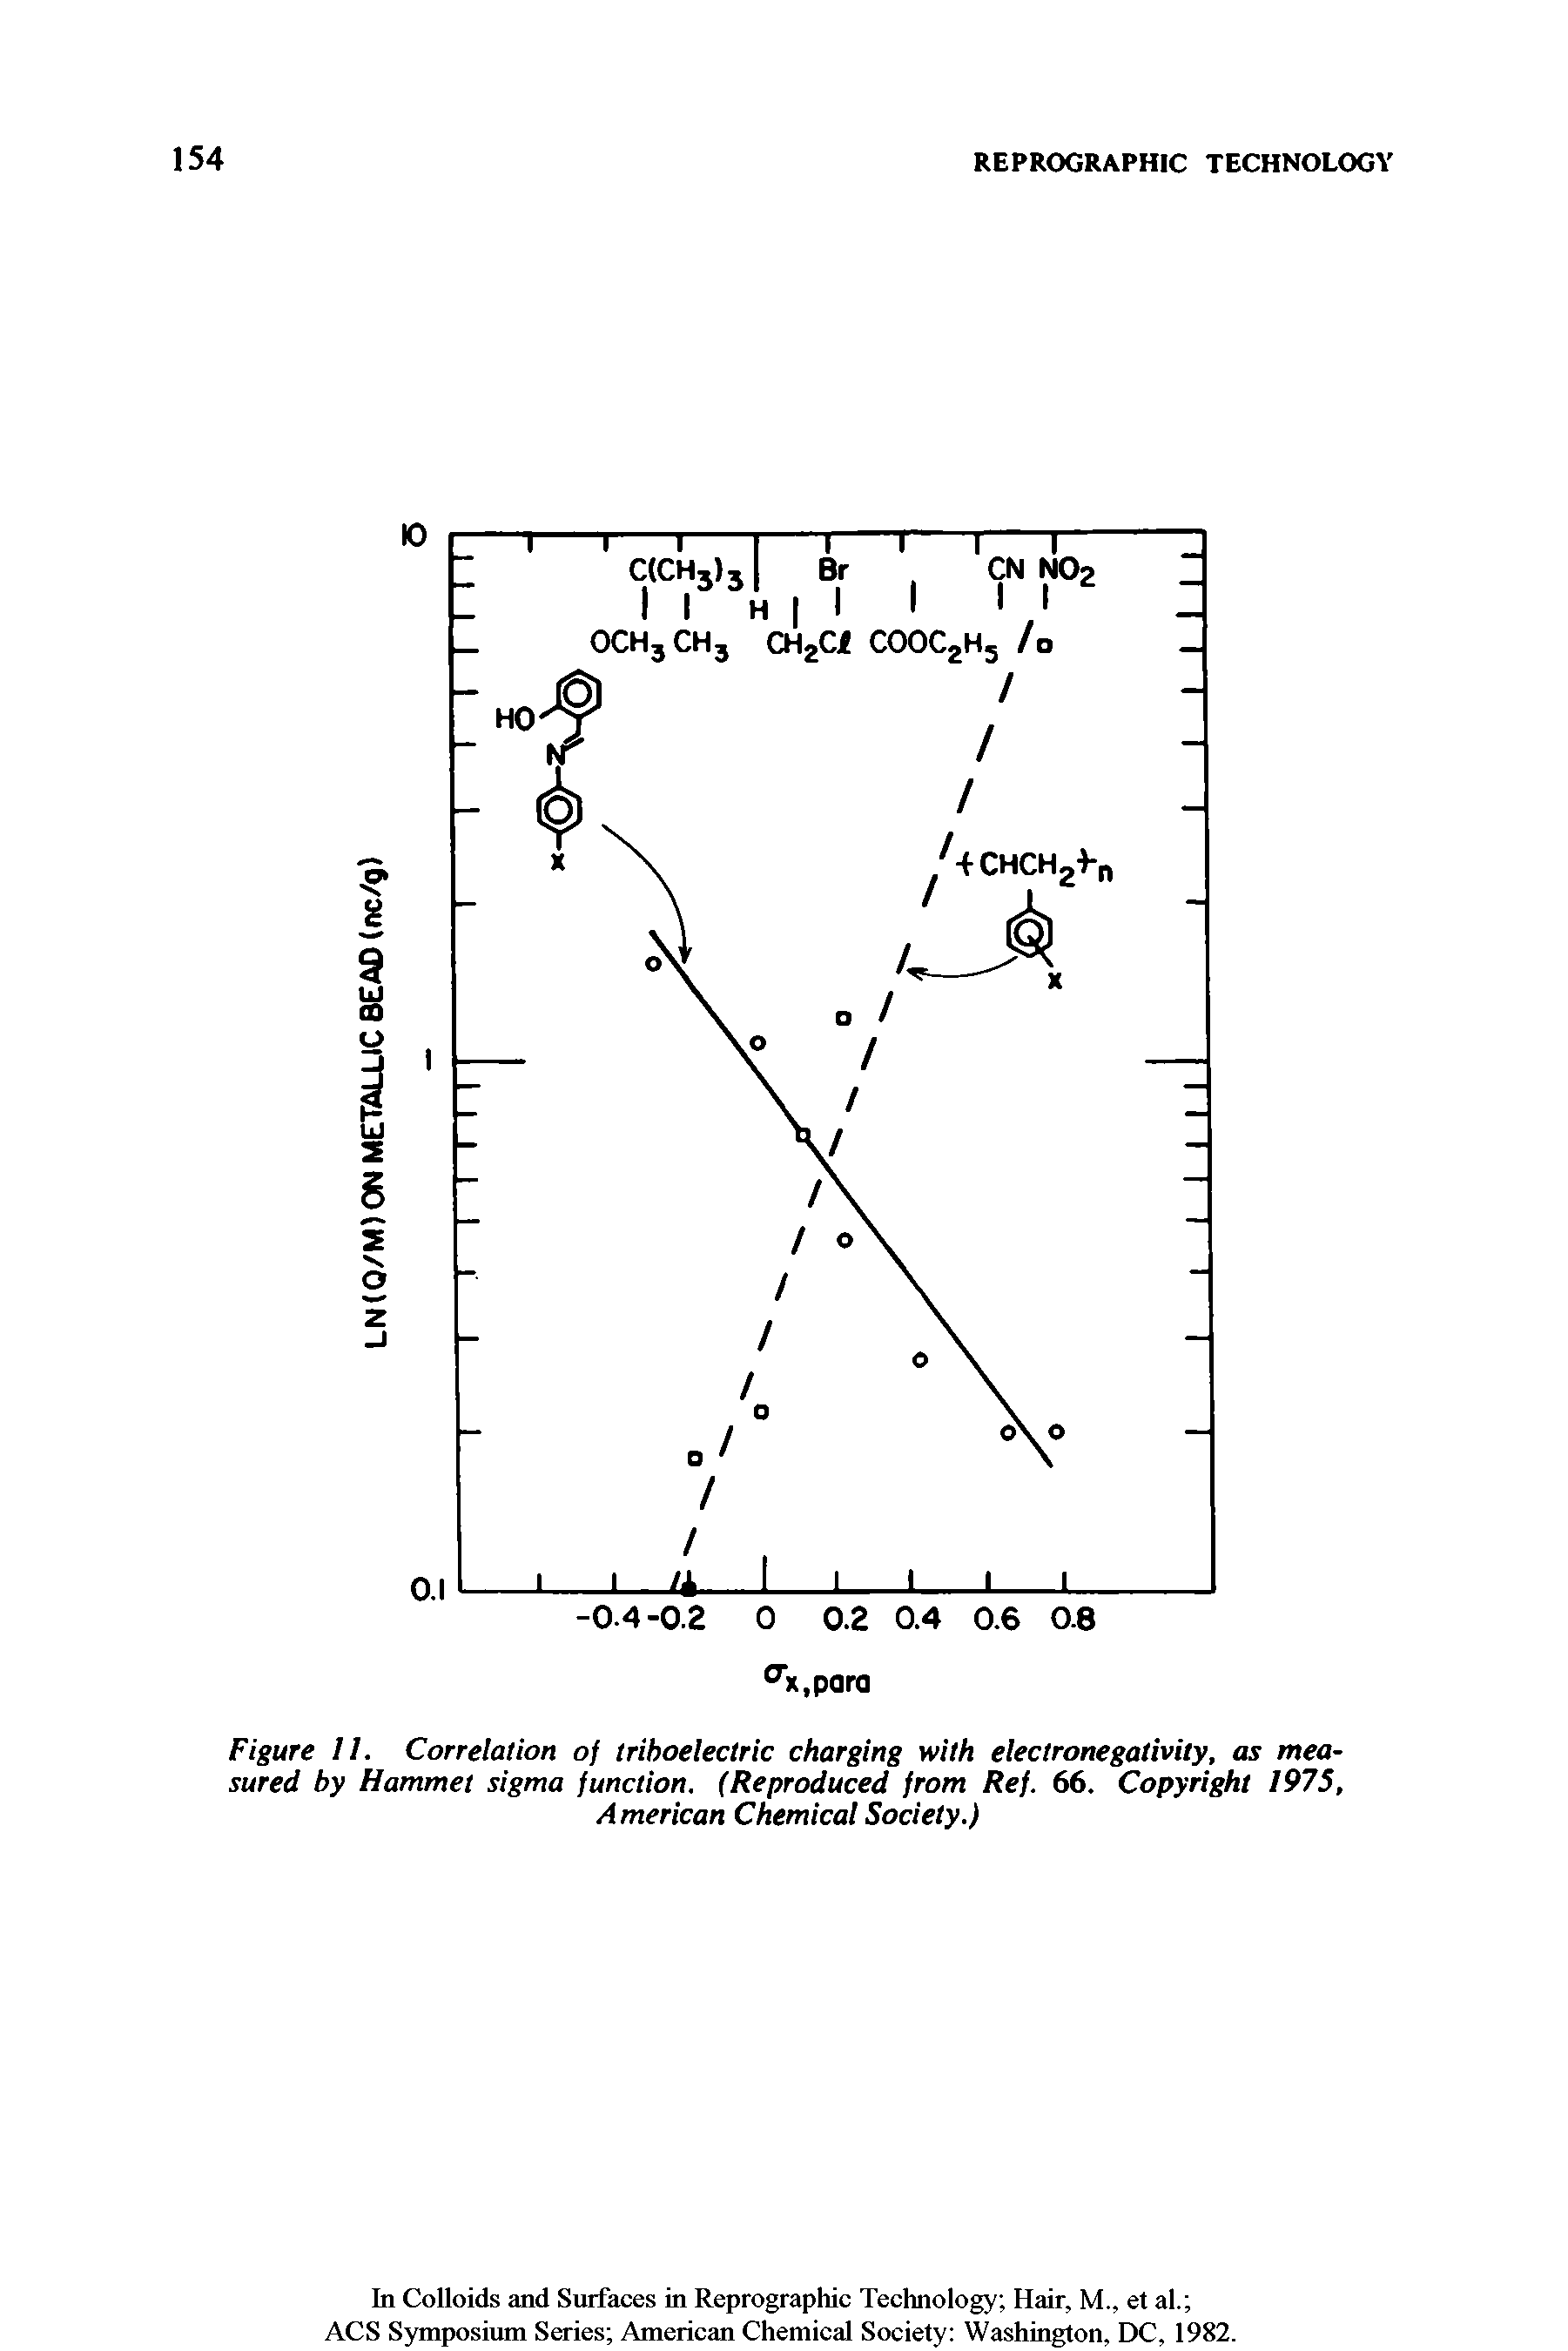 Figure 11. Correlation of triboelectric charging with electronegativity, as measured by Hammet sigma function. (Reproduced from Ref. 66. Copyright 1975, American Chemical Society.)...